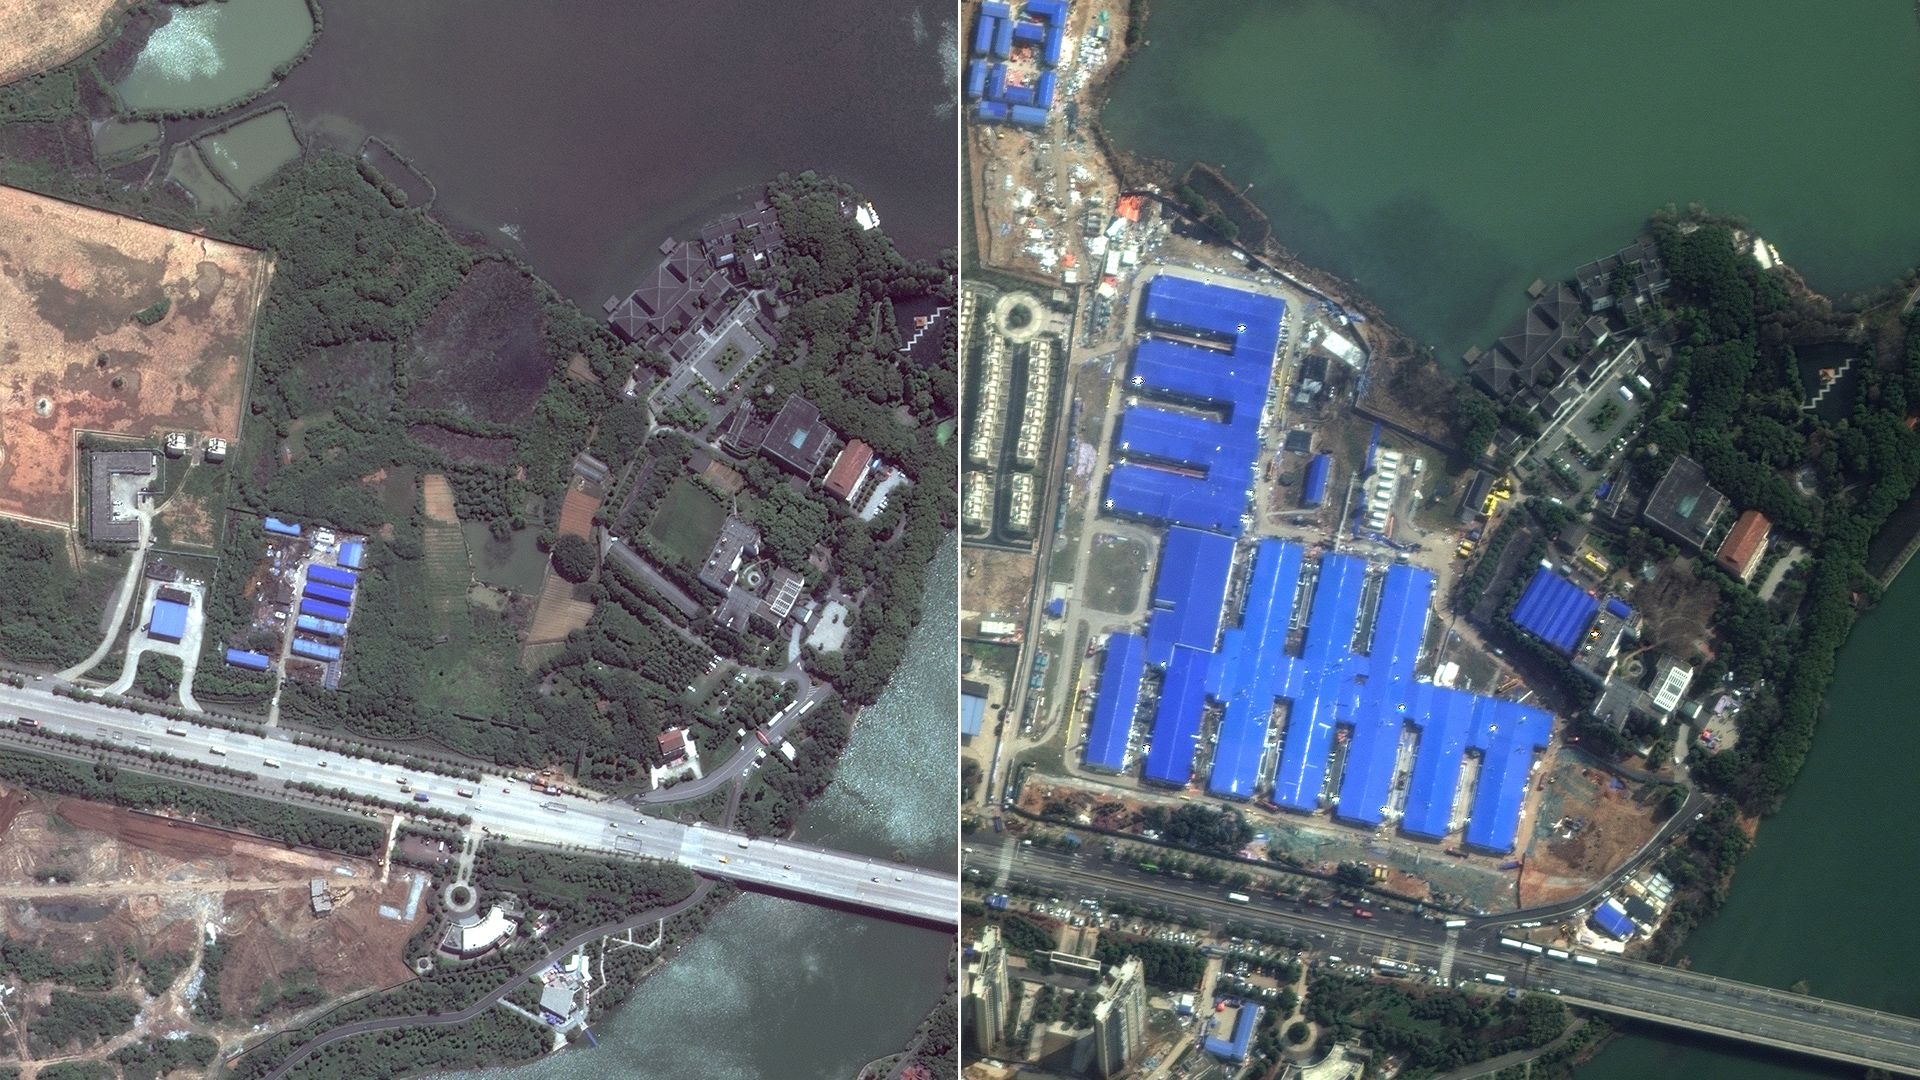 A before and after showing a hospital being built in China amid the coronavirus outbreak